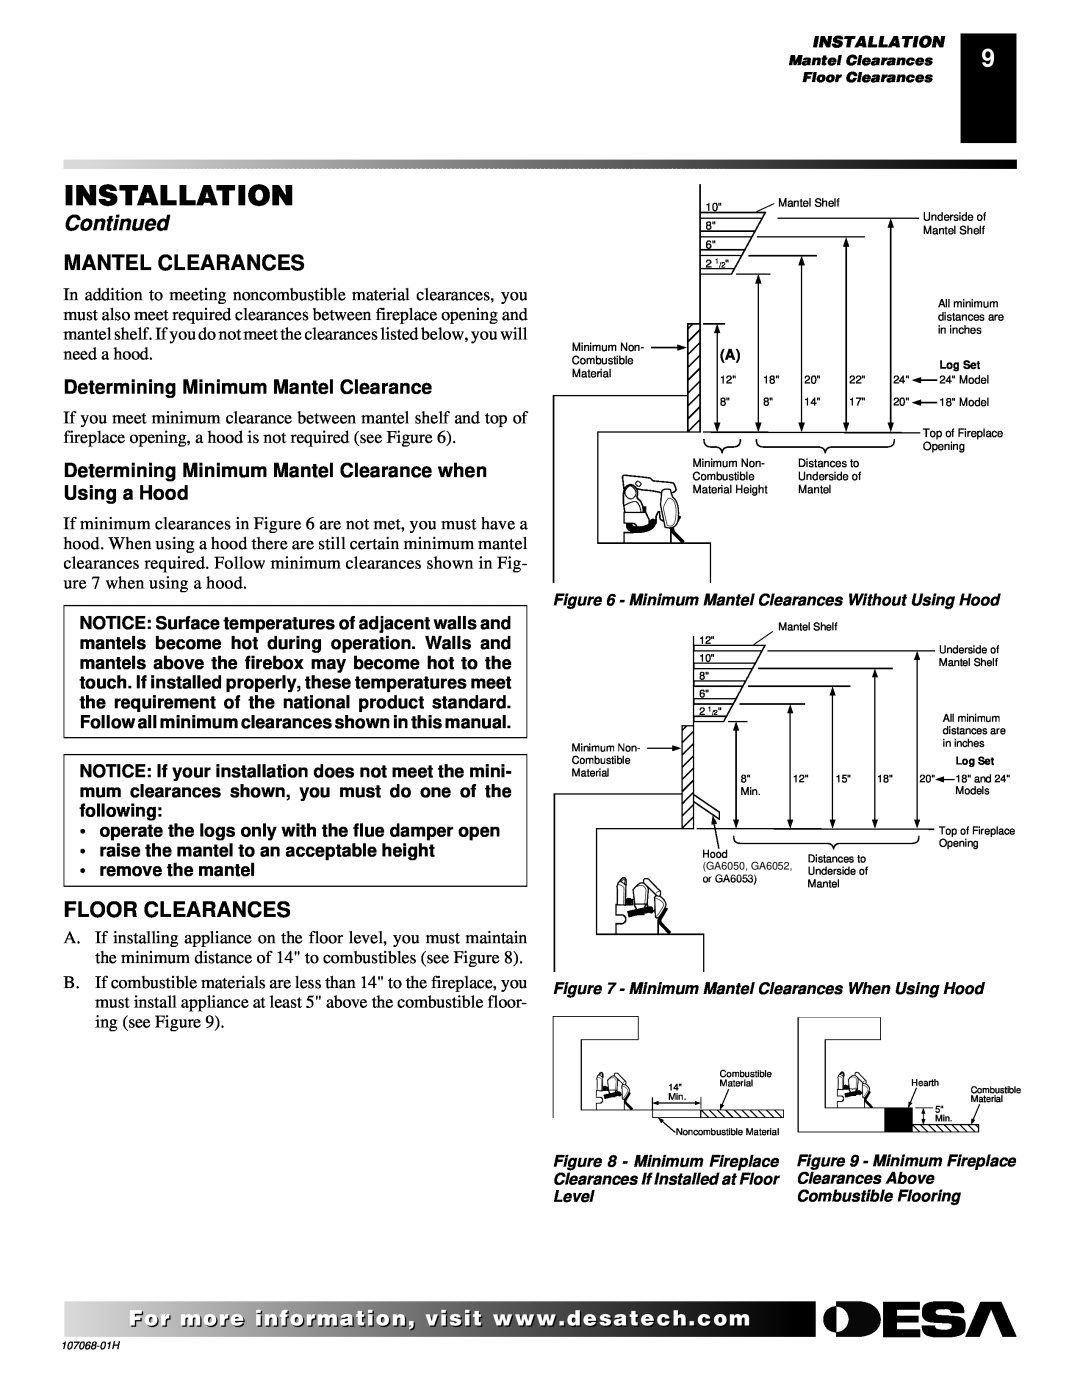 Desa CLD3018NT, CLD3018PT, SGS3124N, SGS3124P installation manual Mantel Clearances, Floor Clearances, Installation, Continued 